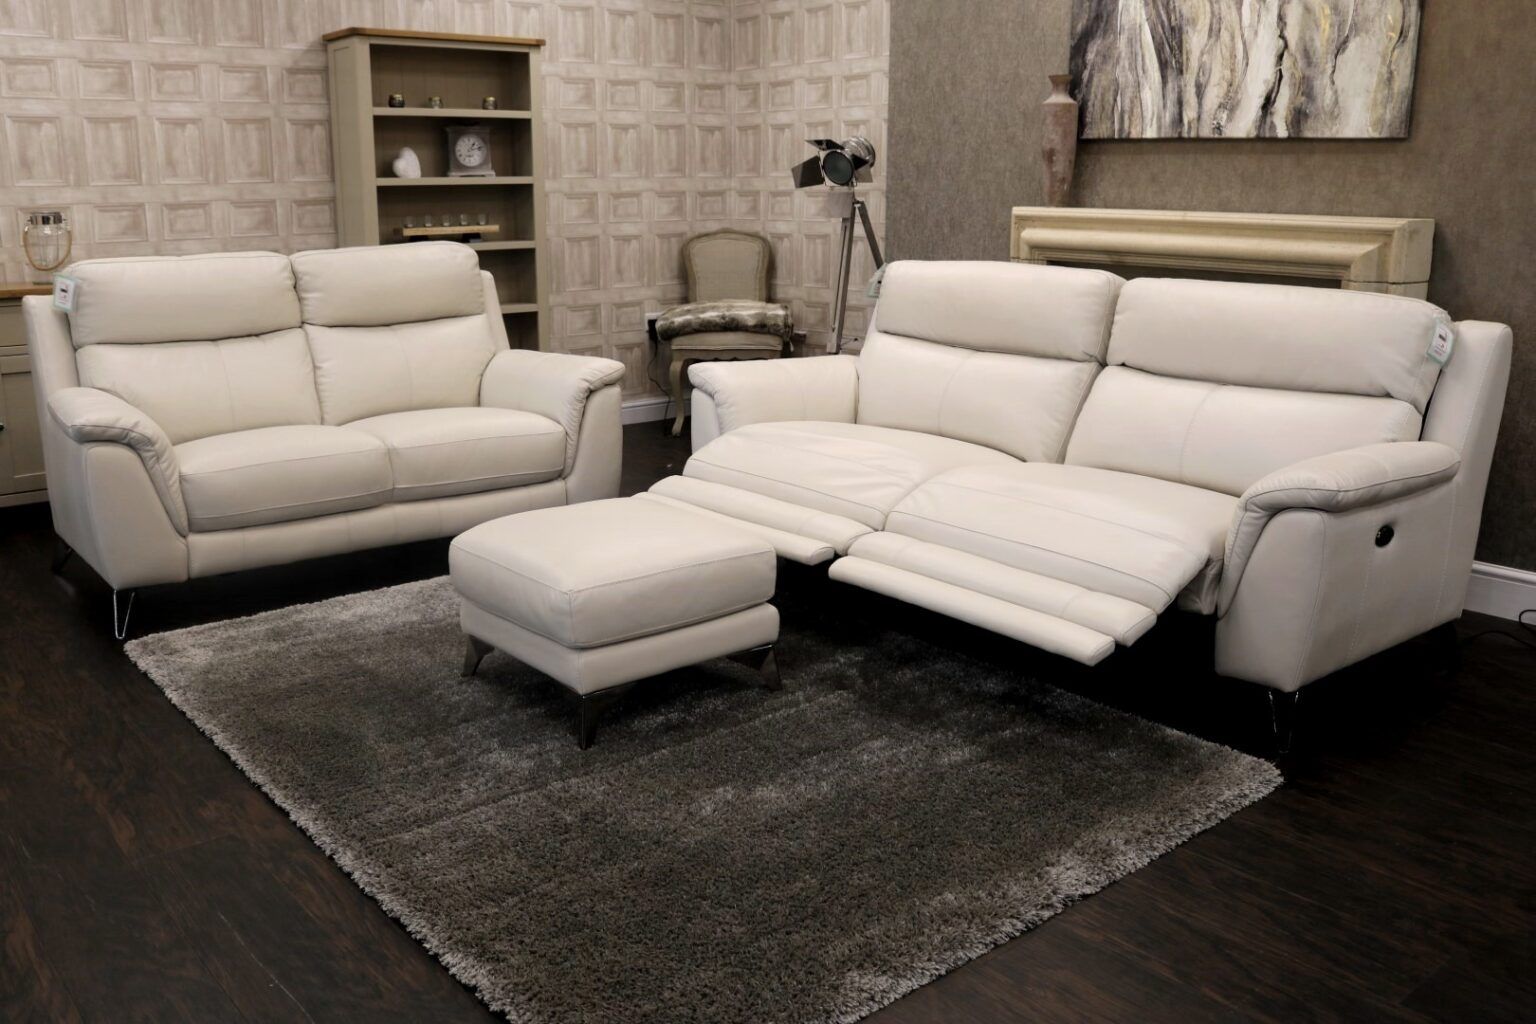 New Incanto Contempo (Famous Designer Brand) Premium Soft Intended For Contempo Power Reclining Sofas (View 9 of 15)